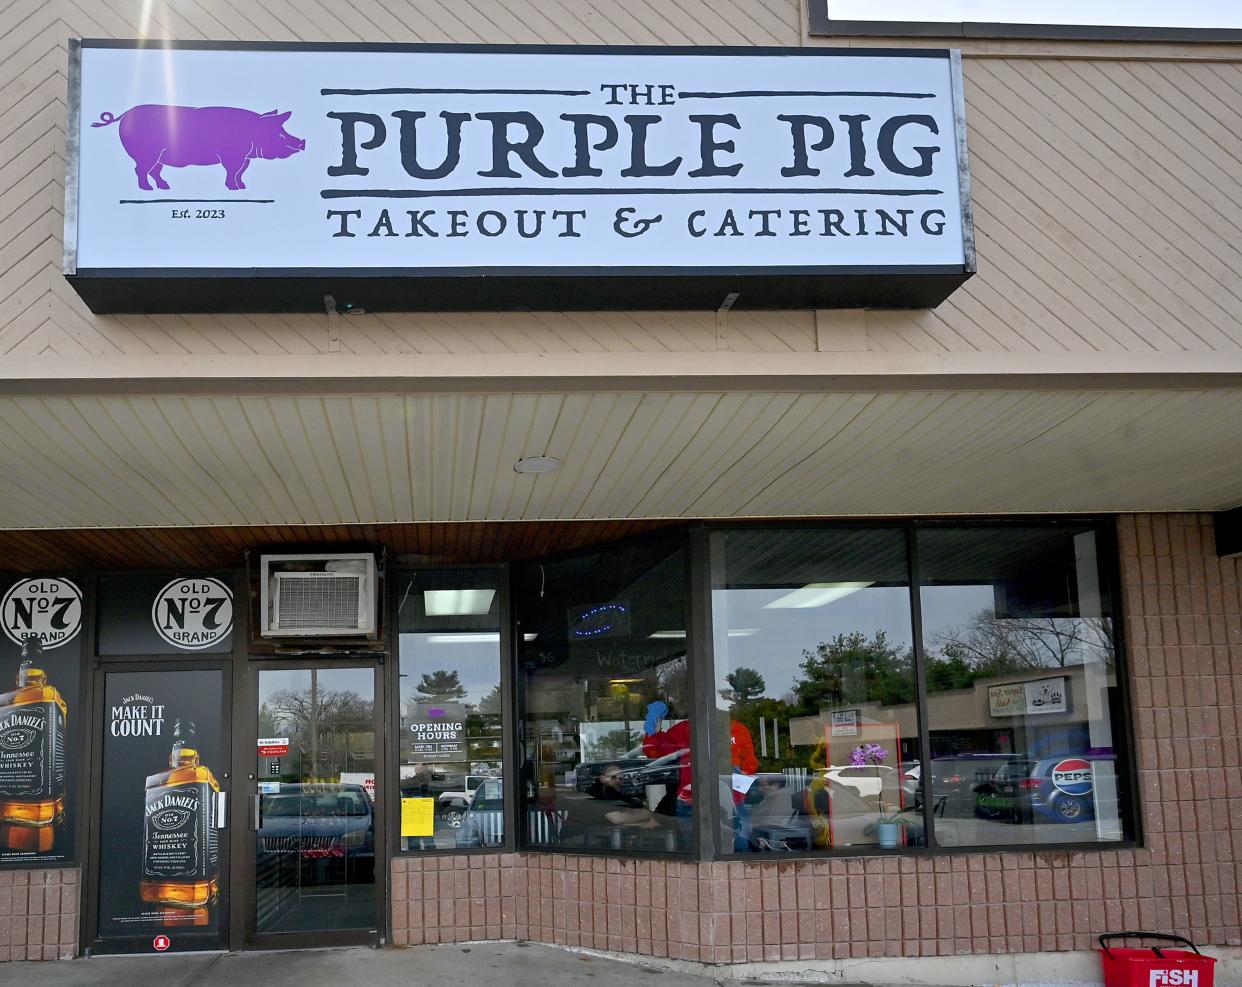 The Purple Pig opened in mid-February in the Twin Boro Crossing Plaza in Marlborough.